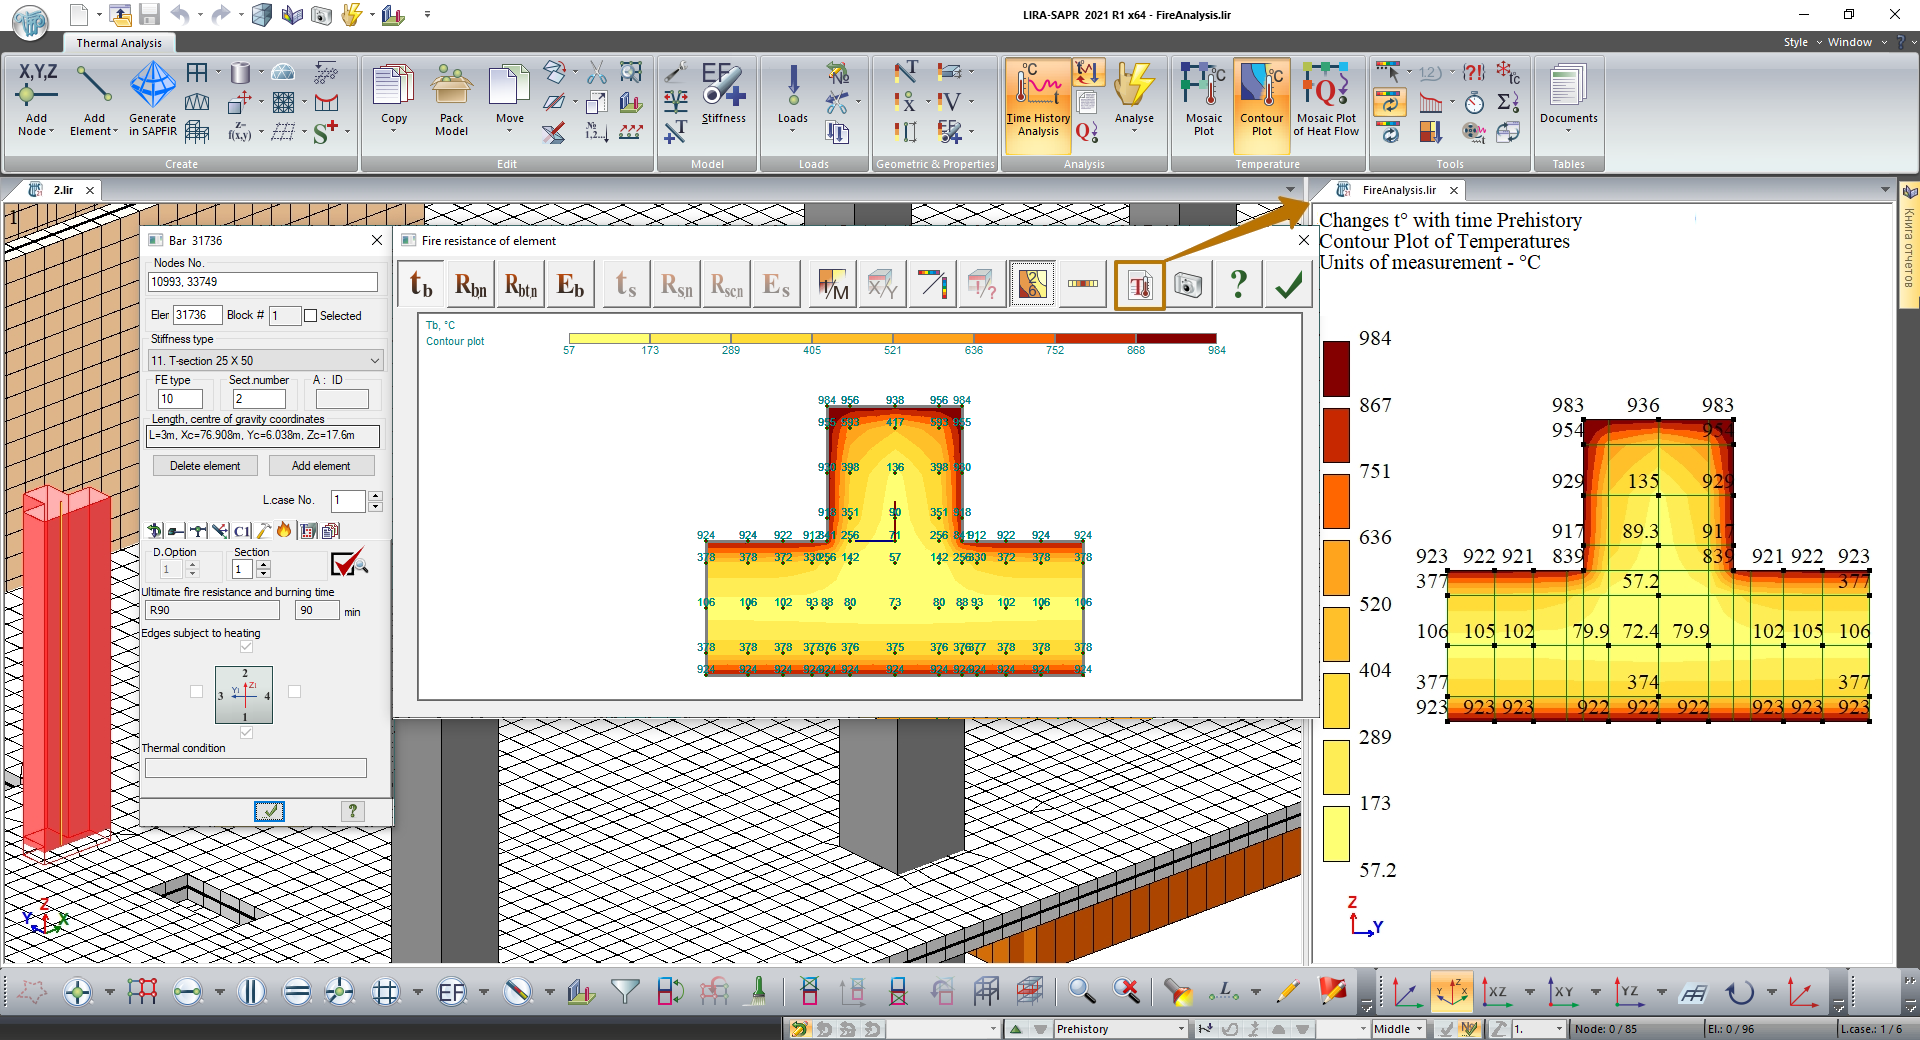 Creating txt-file for thermal analysis according to parameters in fire resistance problem 